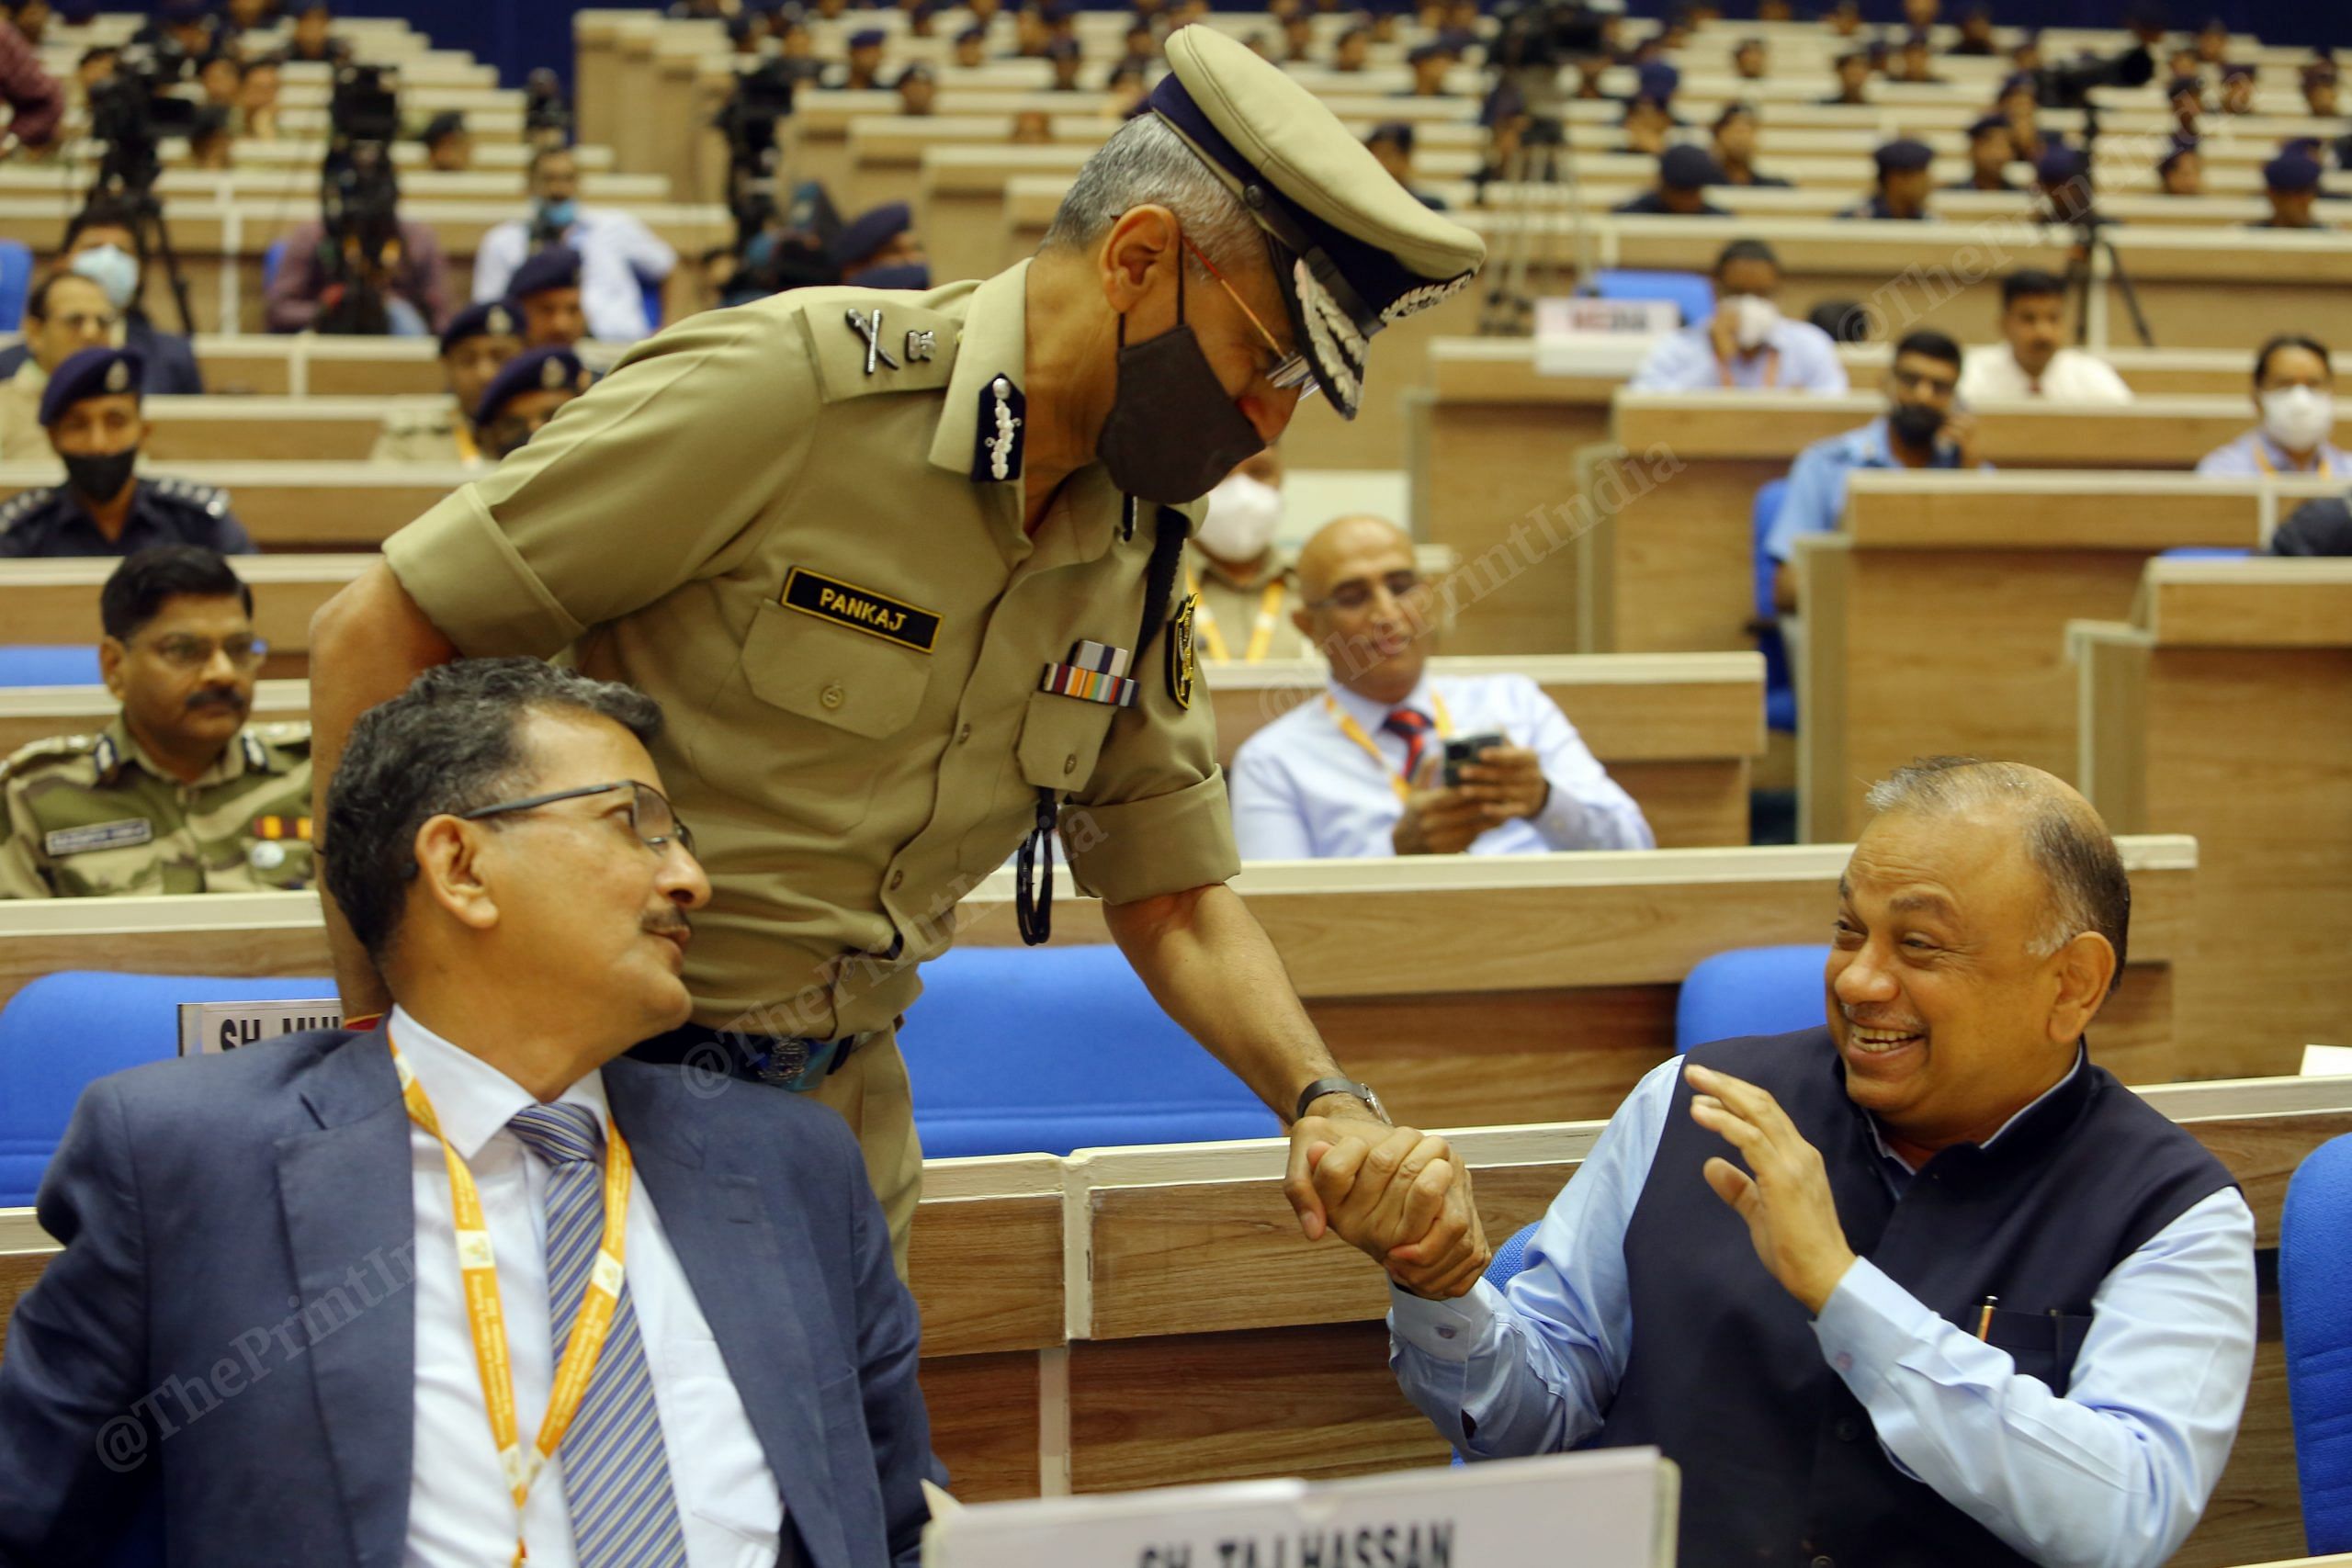 Left to Right: Chief of Fire Service Taj Hassan, BSF DG Pankaj Kumar Singh, and during the BPR&D DG Balaji Srivastava during the Annual Conference on Capacity Building for Disaster Response- 2022 at Vigyan Bhawan | Praveen Jain | ThePrint